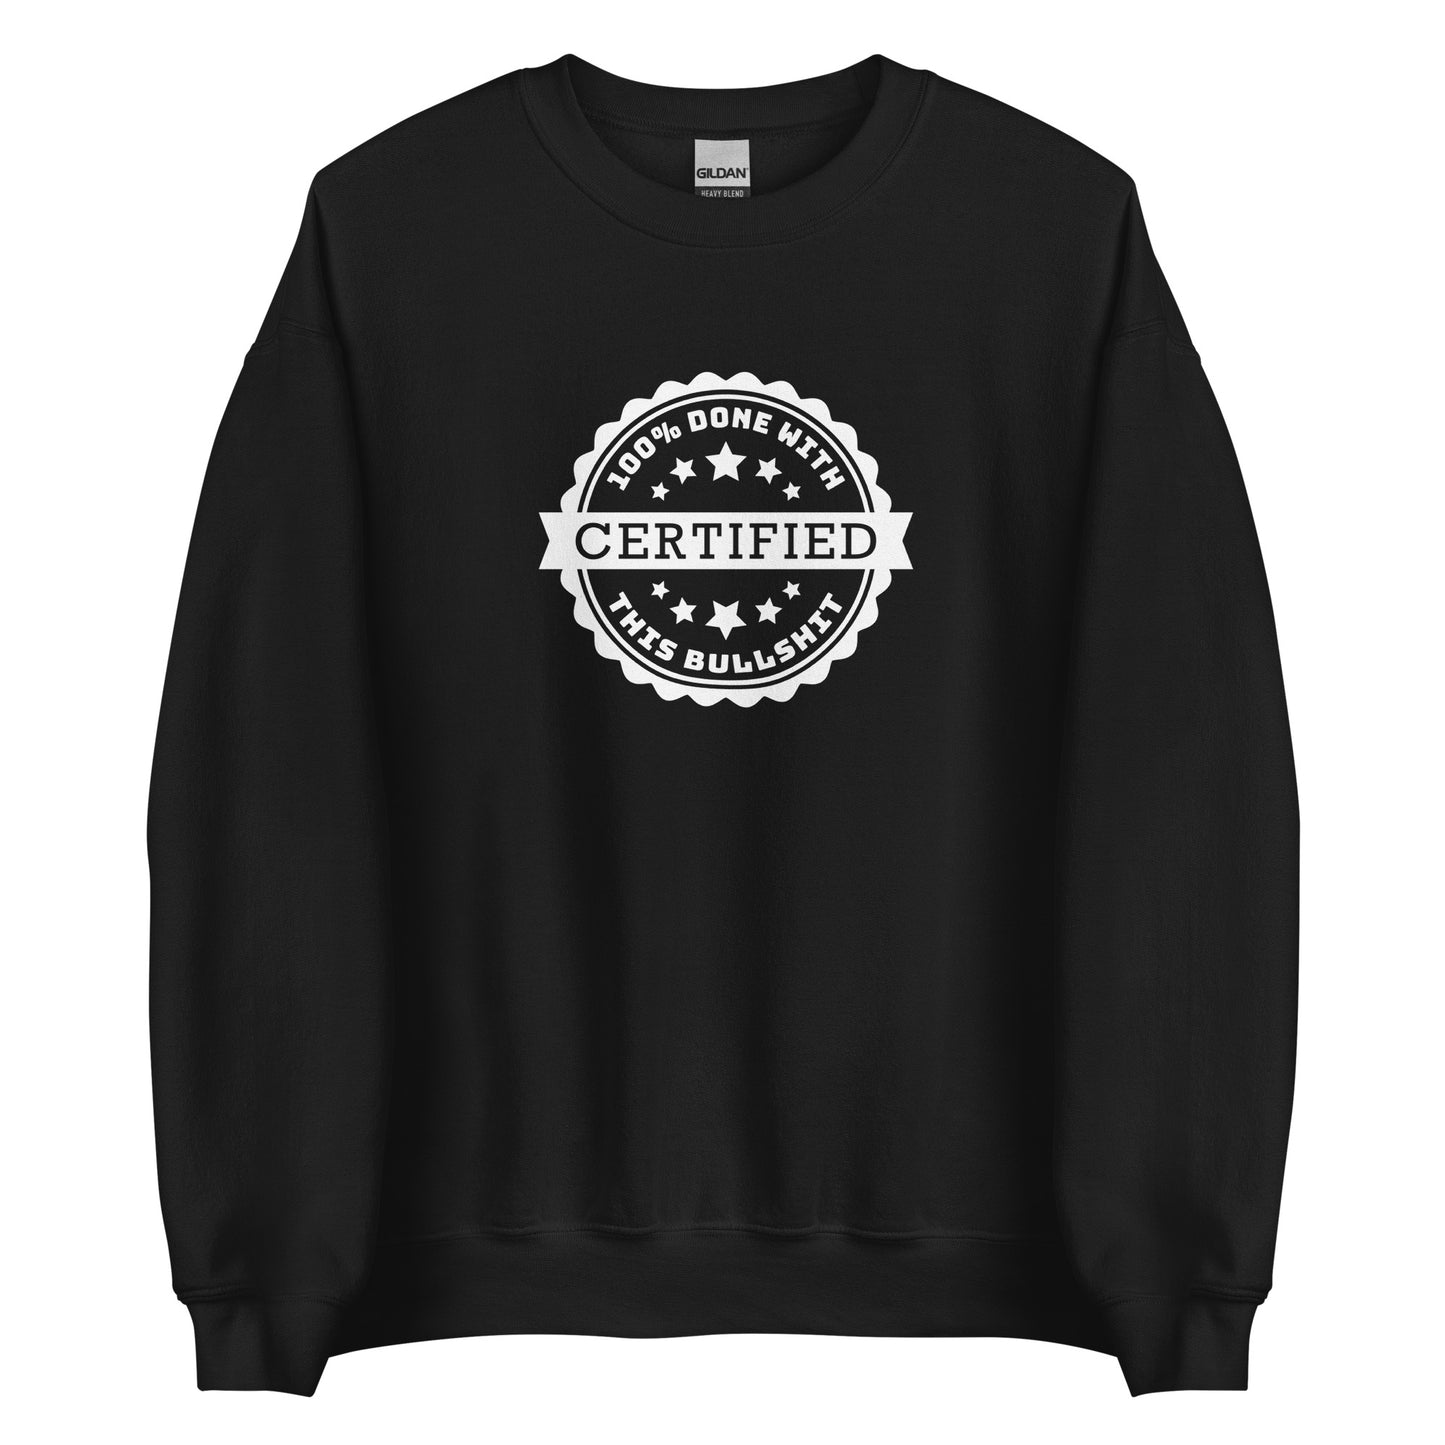 A black crewneck sweatshirt featuring a graphic of an official-looking stamped seal. Text on the seal reads: "CERTIFIED: 100% done with this bullshit"